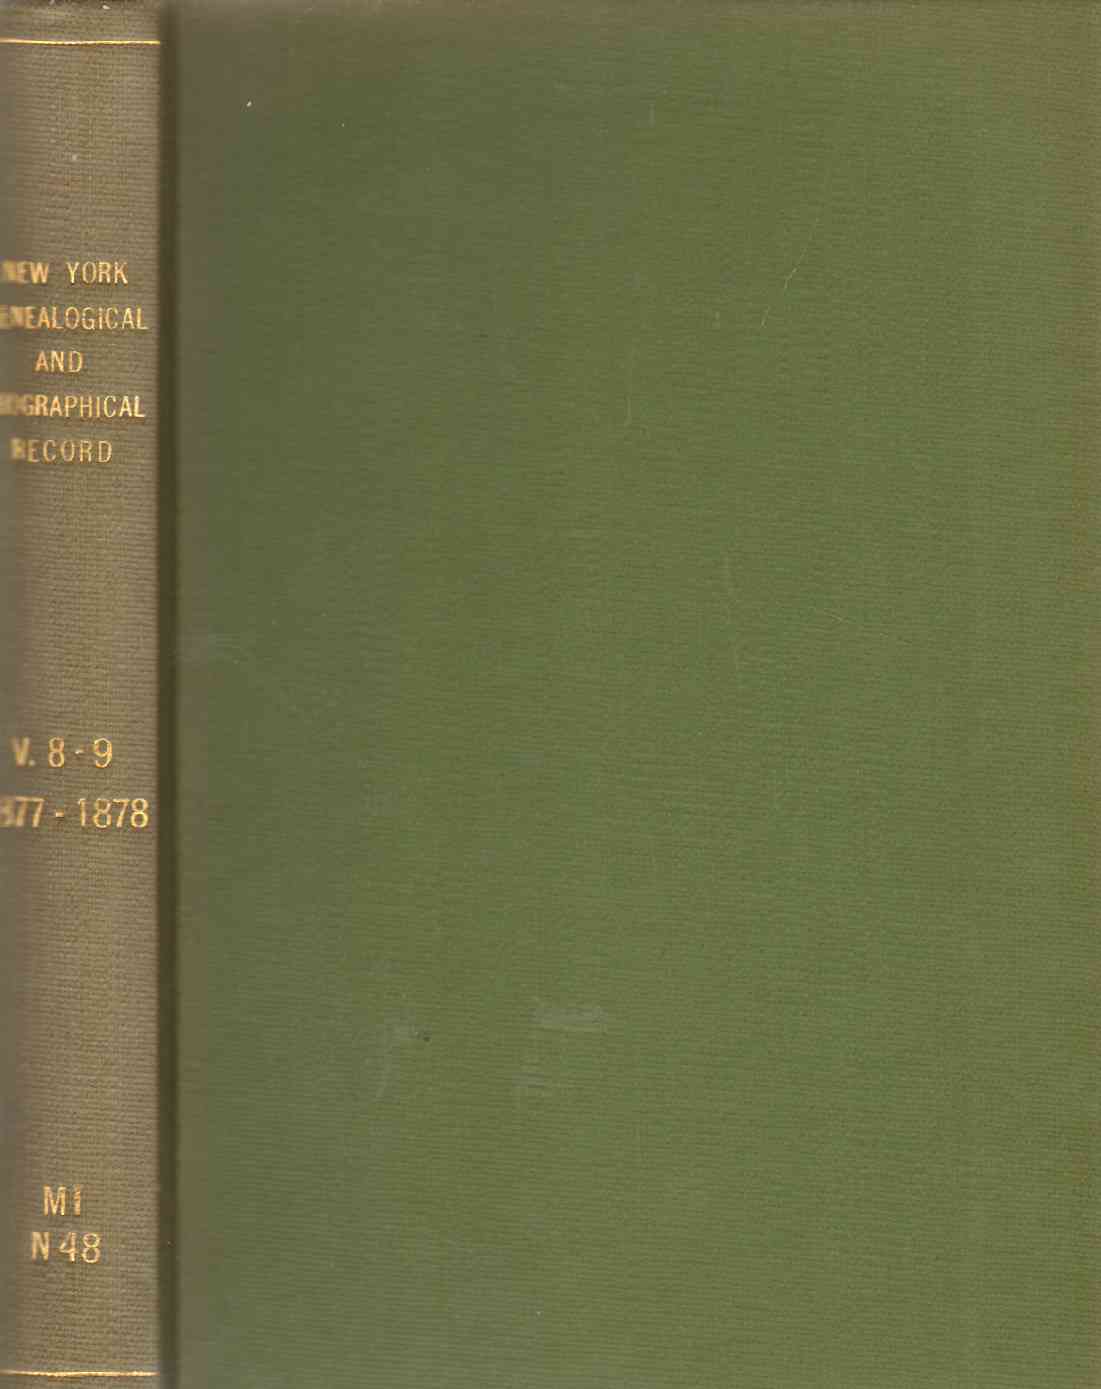 Image for NEW YORK GENEALOGICAL AND BIOGRAPHICAL RECORD Volumes VIII & IX January 1877 to October 1878